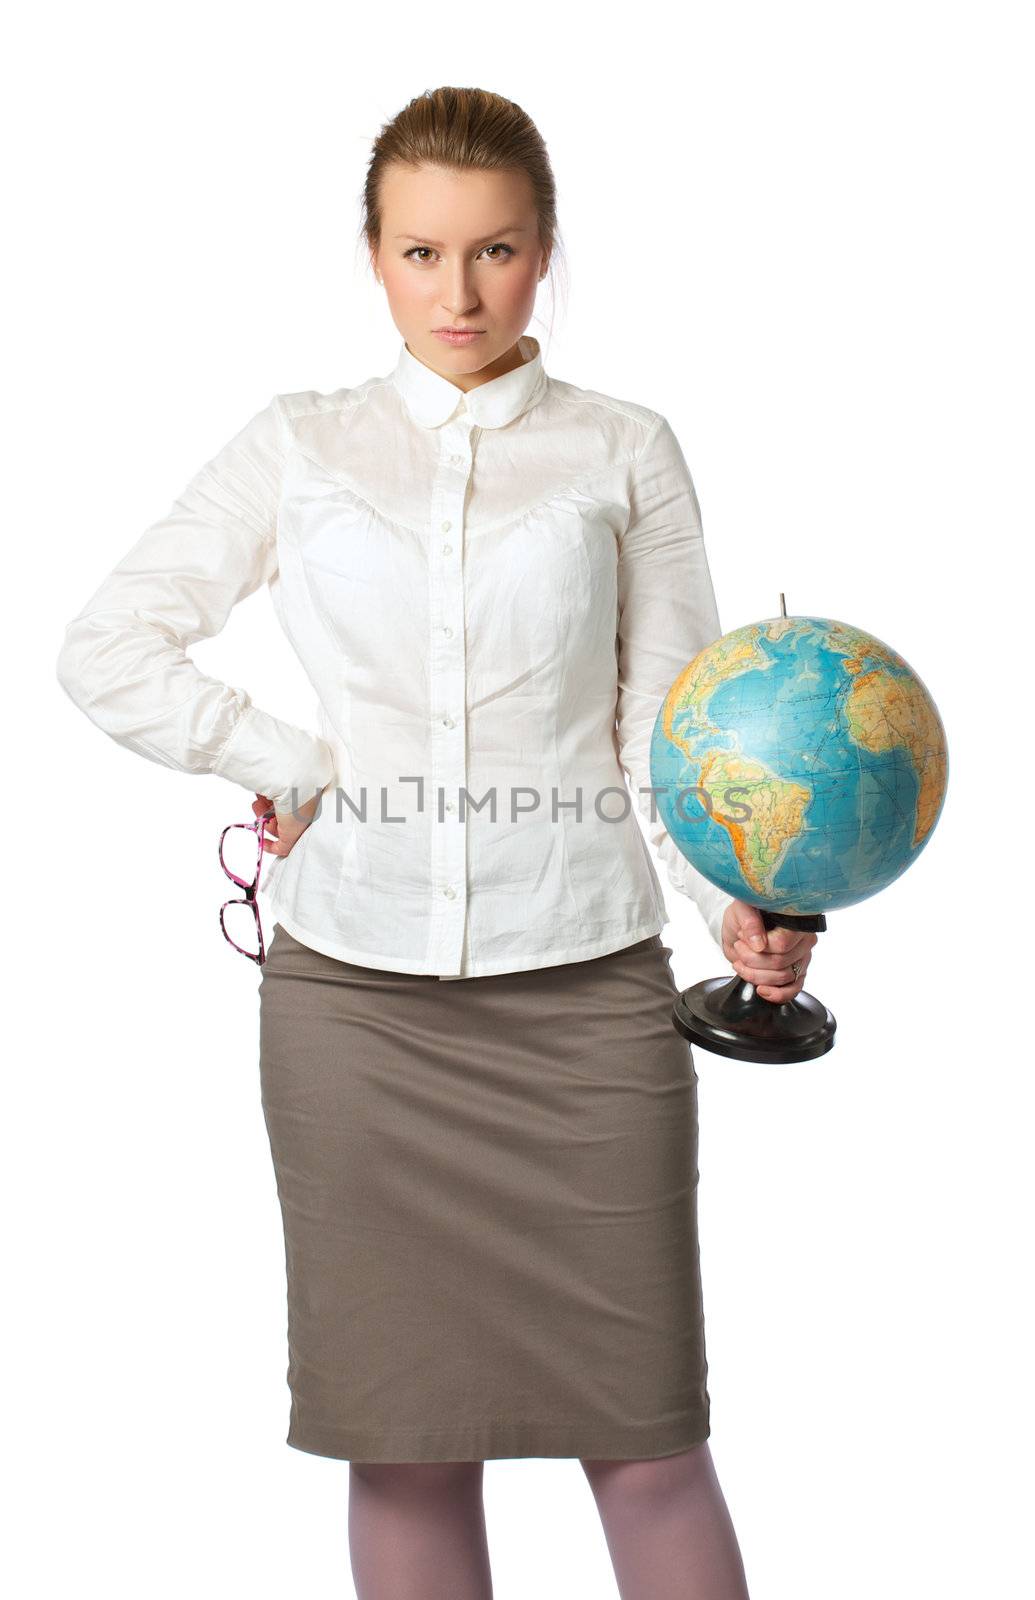 angry teacher with globe by petr_malyshev